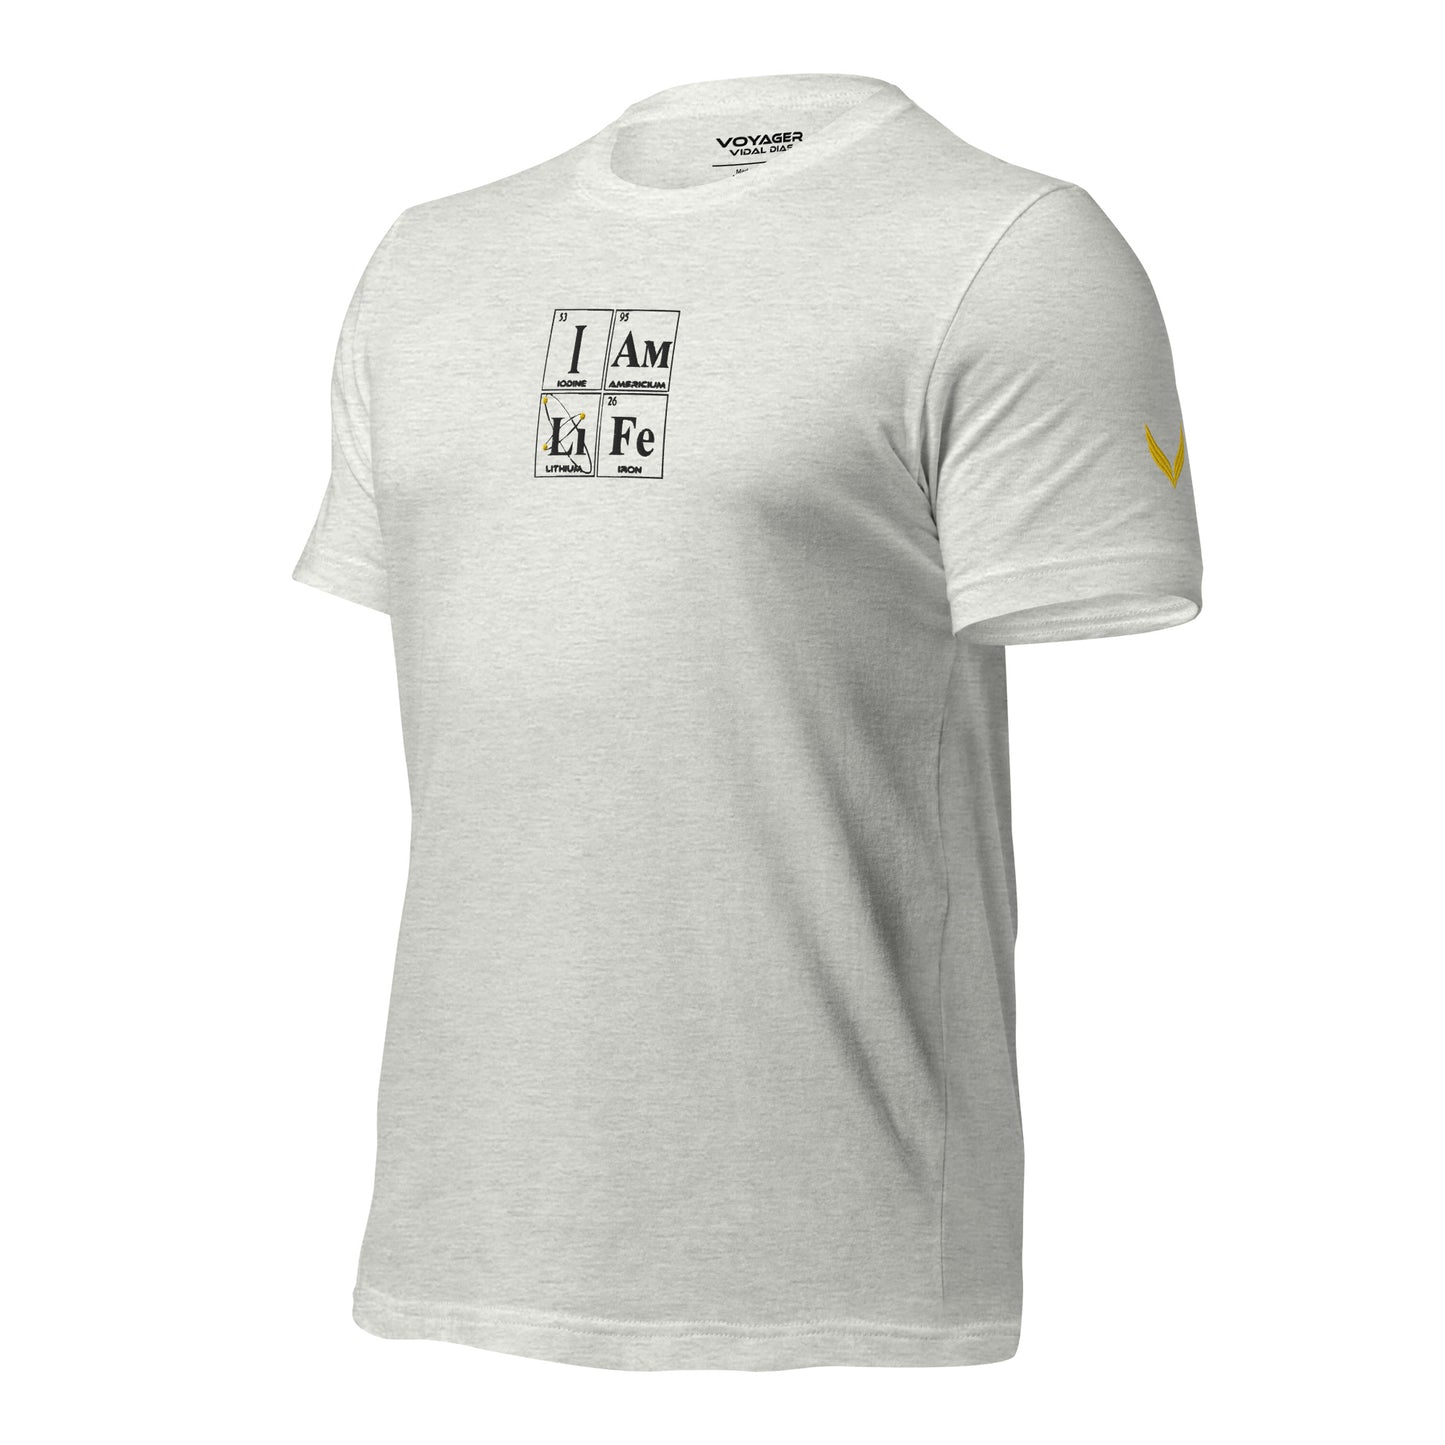 I Am Life embroidered t-shirt